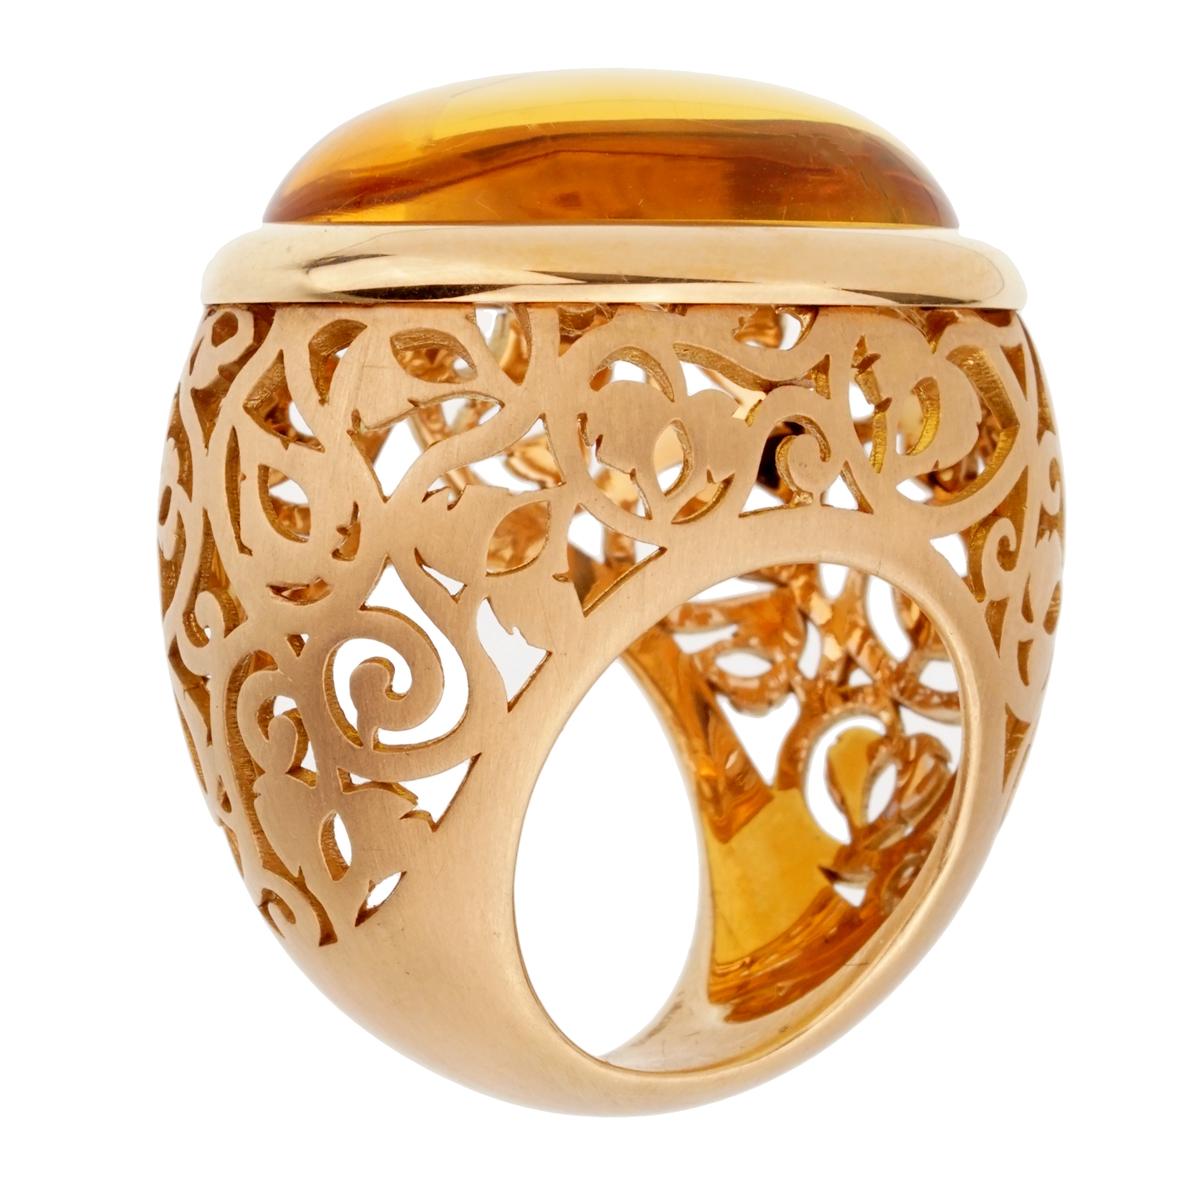 A magnificent brand new Pomellato rose gold cocktail ring showcasing a 19.94ct cabochon Amber. The ring measures a size 6.25 and can be resized.

Pomellato Retail Price: $7,800
Sku: 2326